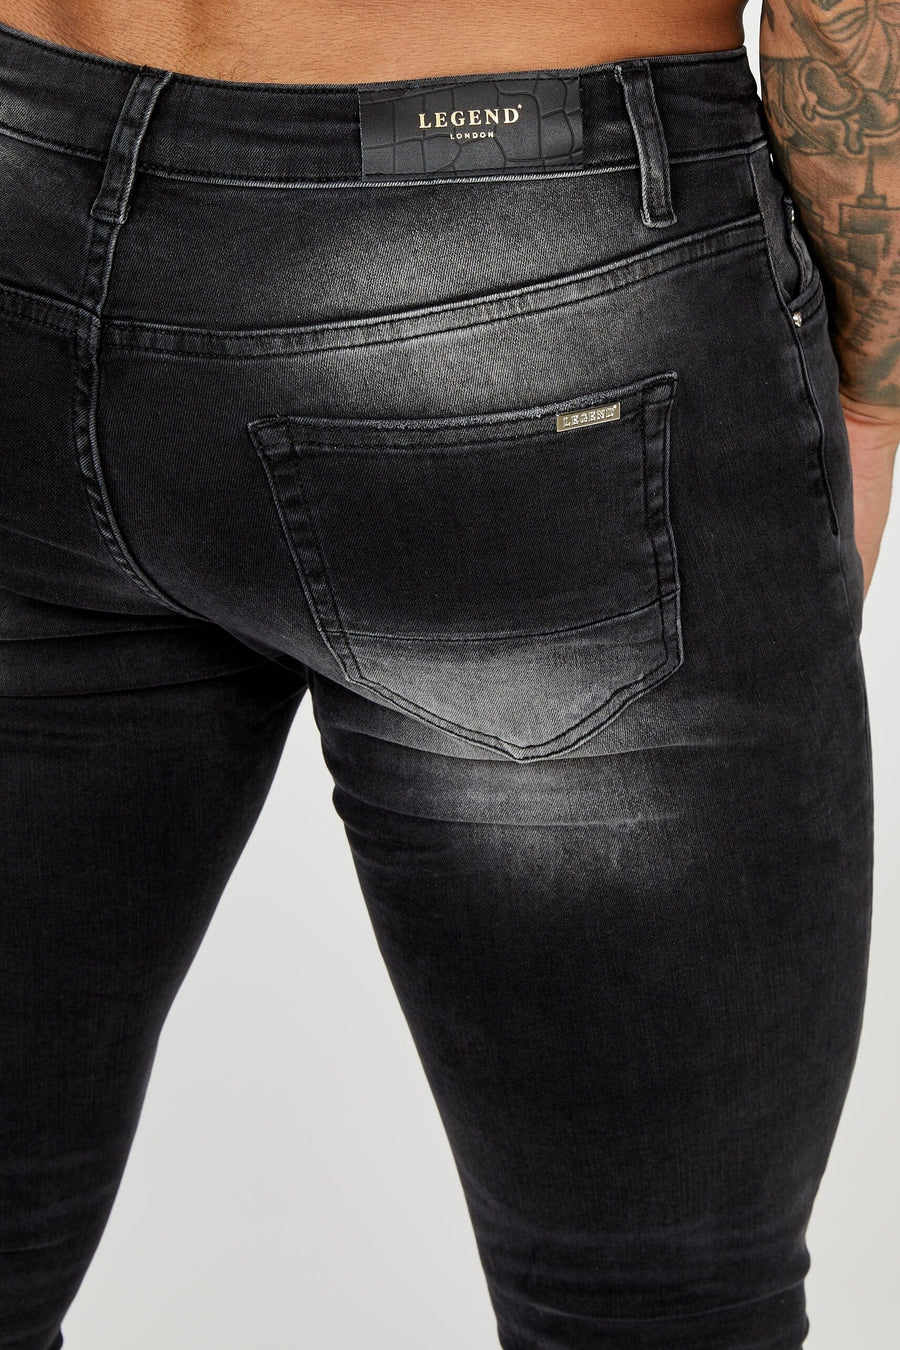 Legend London Jeans PREMIUM SPRAY-ON FIT JEANS - GREY WASHED RIPPED & REPAIRED